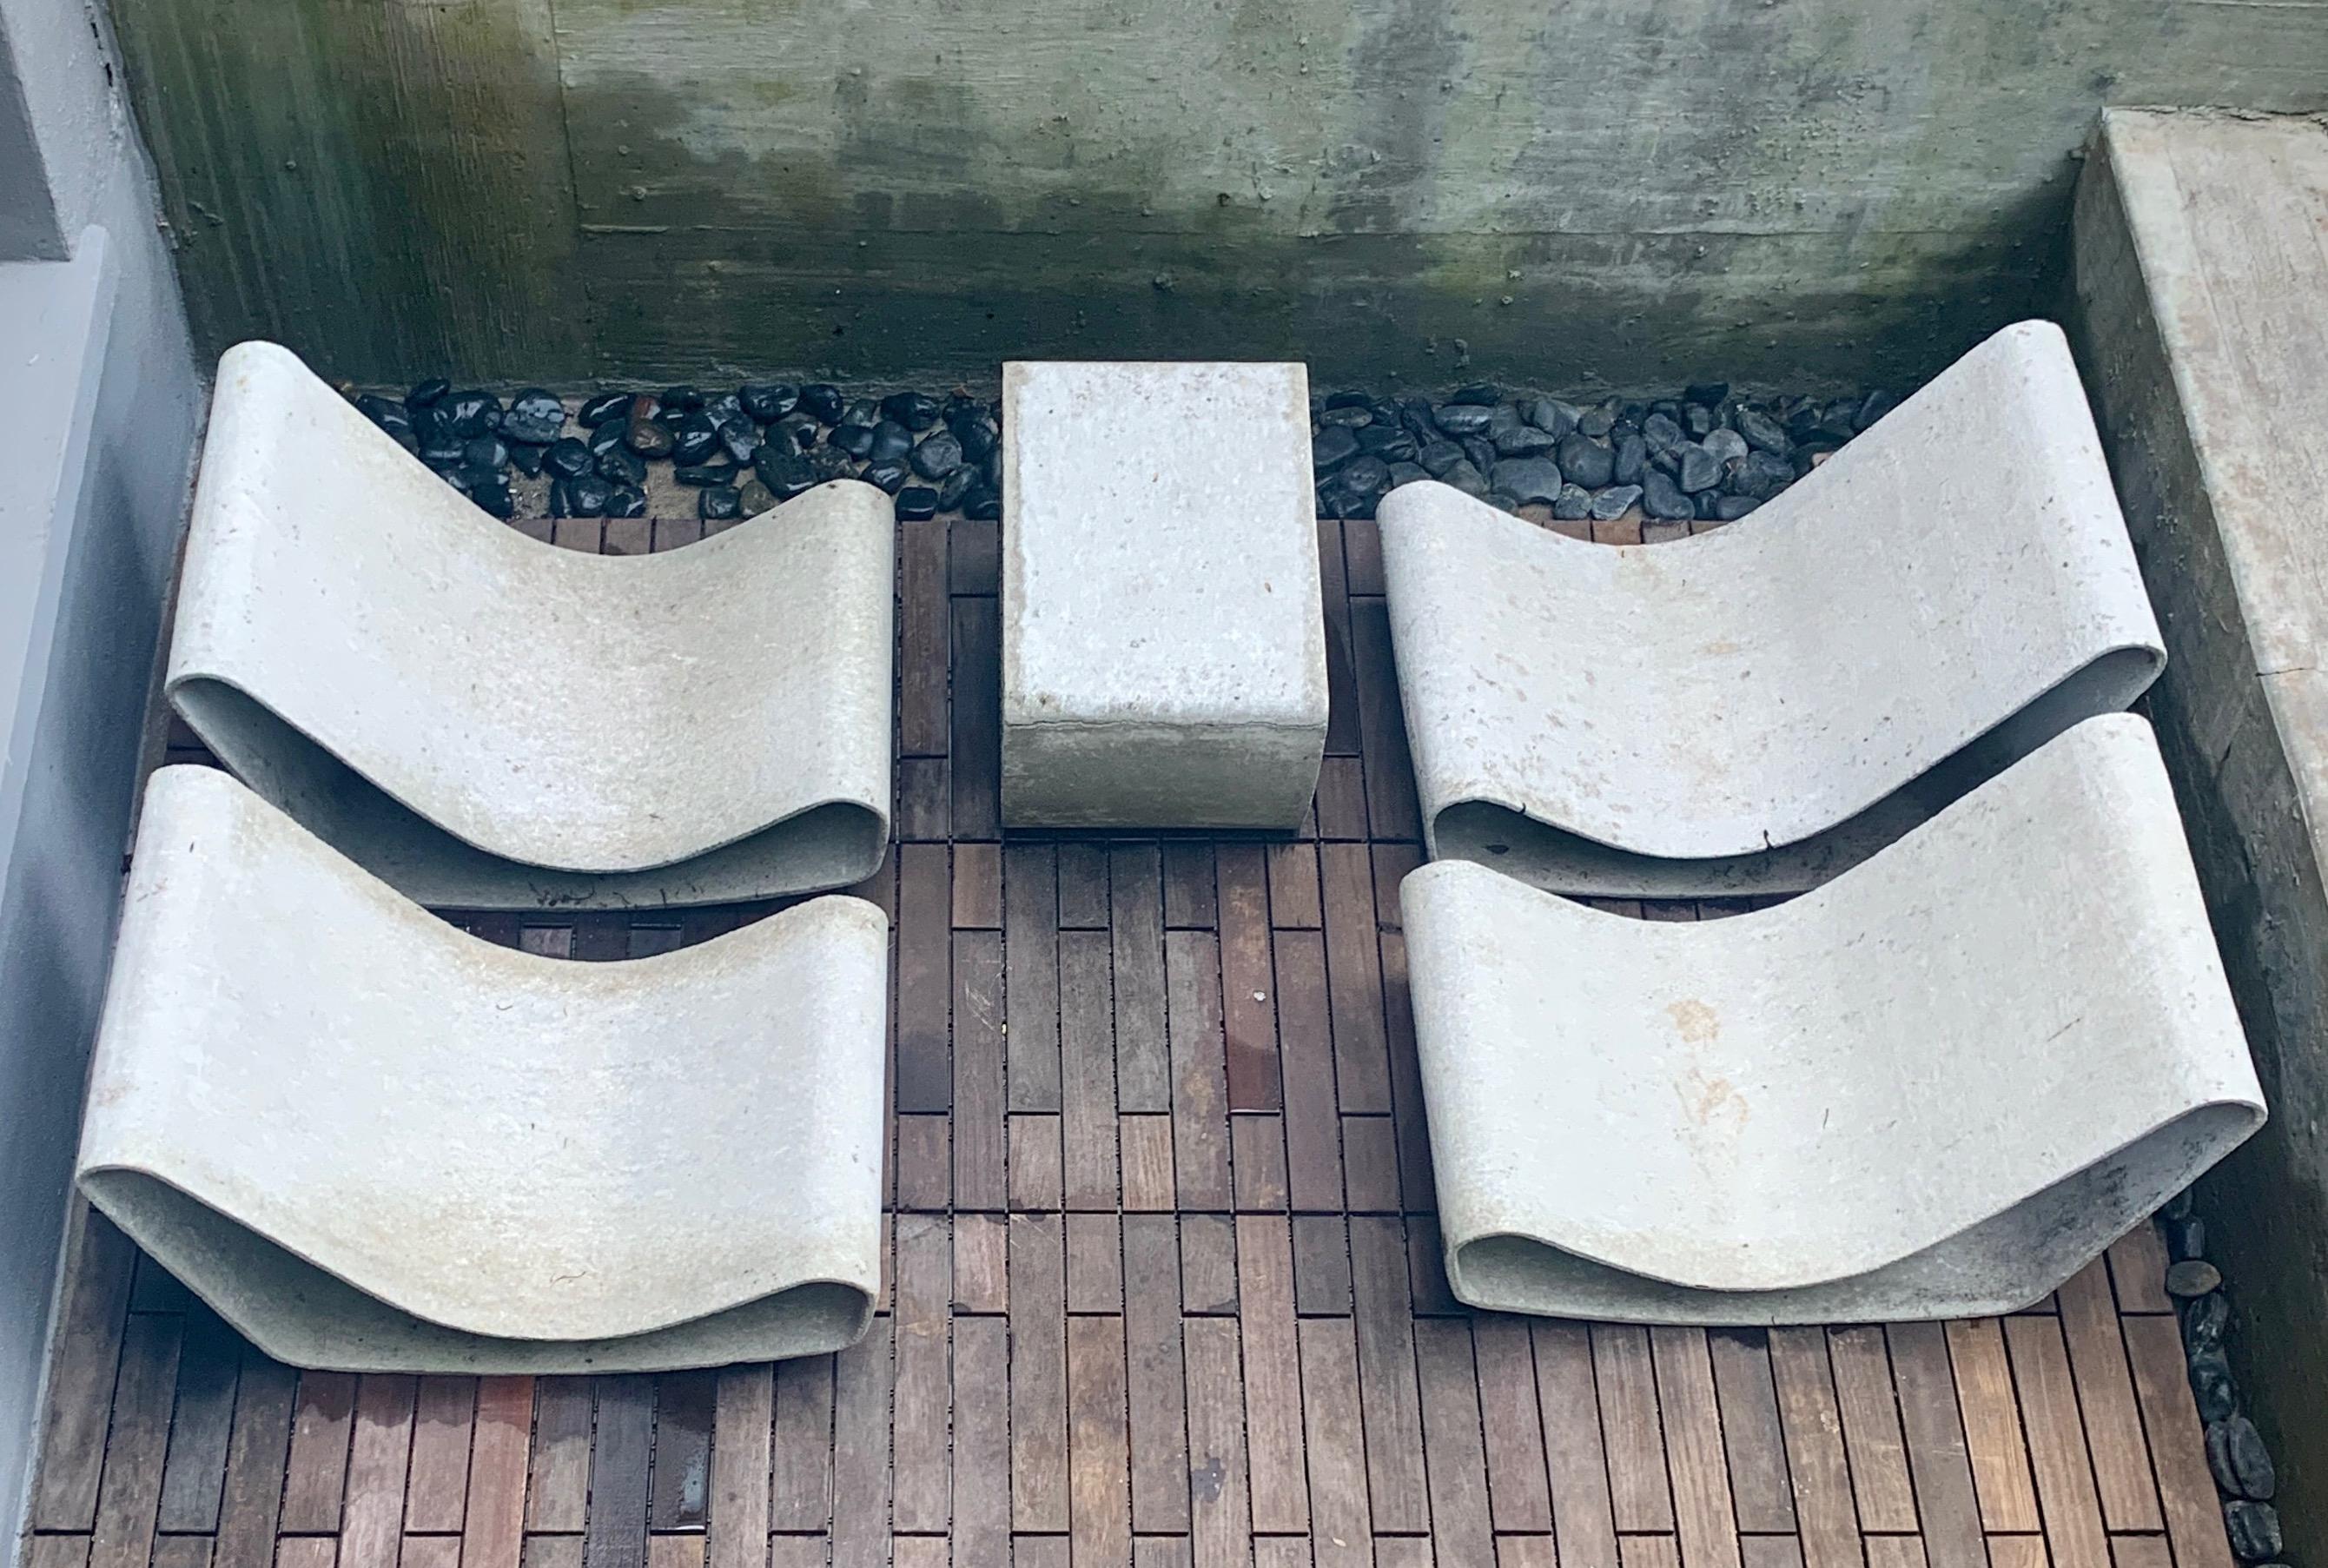 Set of six (6) Original Willy Guhl loop chairs with side table sold as a period-original set. 

The Loop Chair was created by the Swiss designer Willy Guhl in 1954, featuring a single volume of seats and backs. The original edition of Loop Chairs